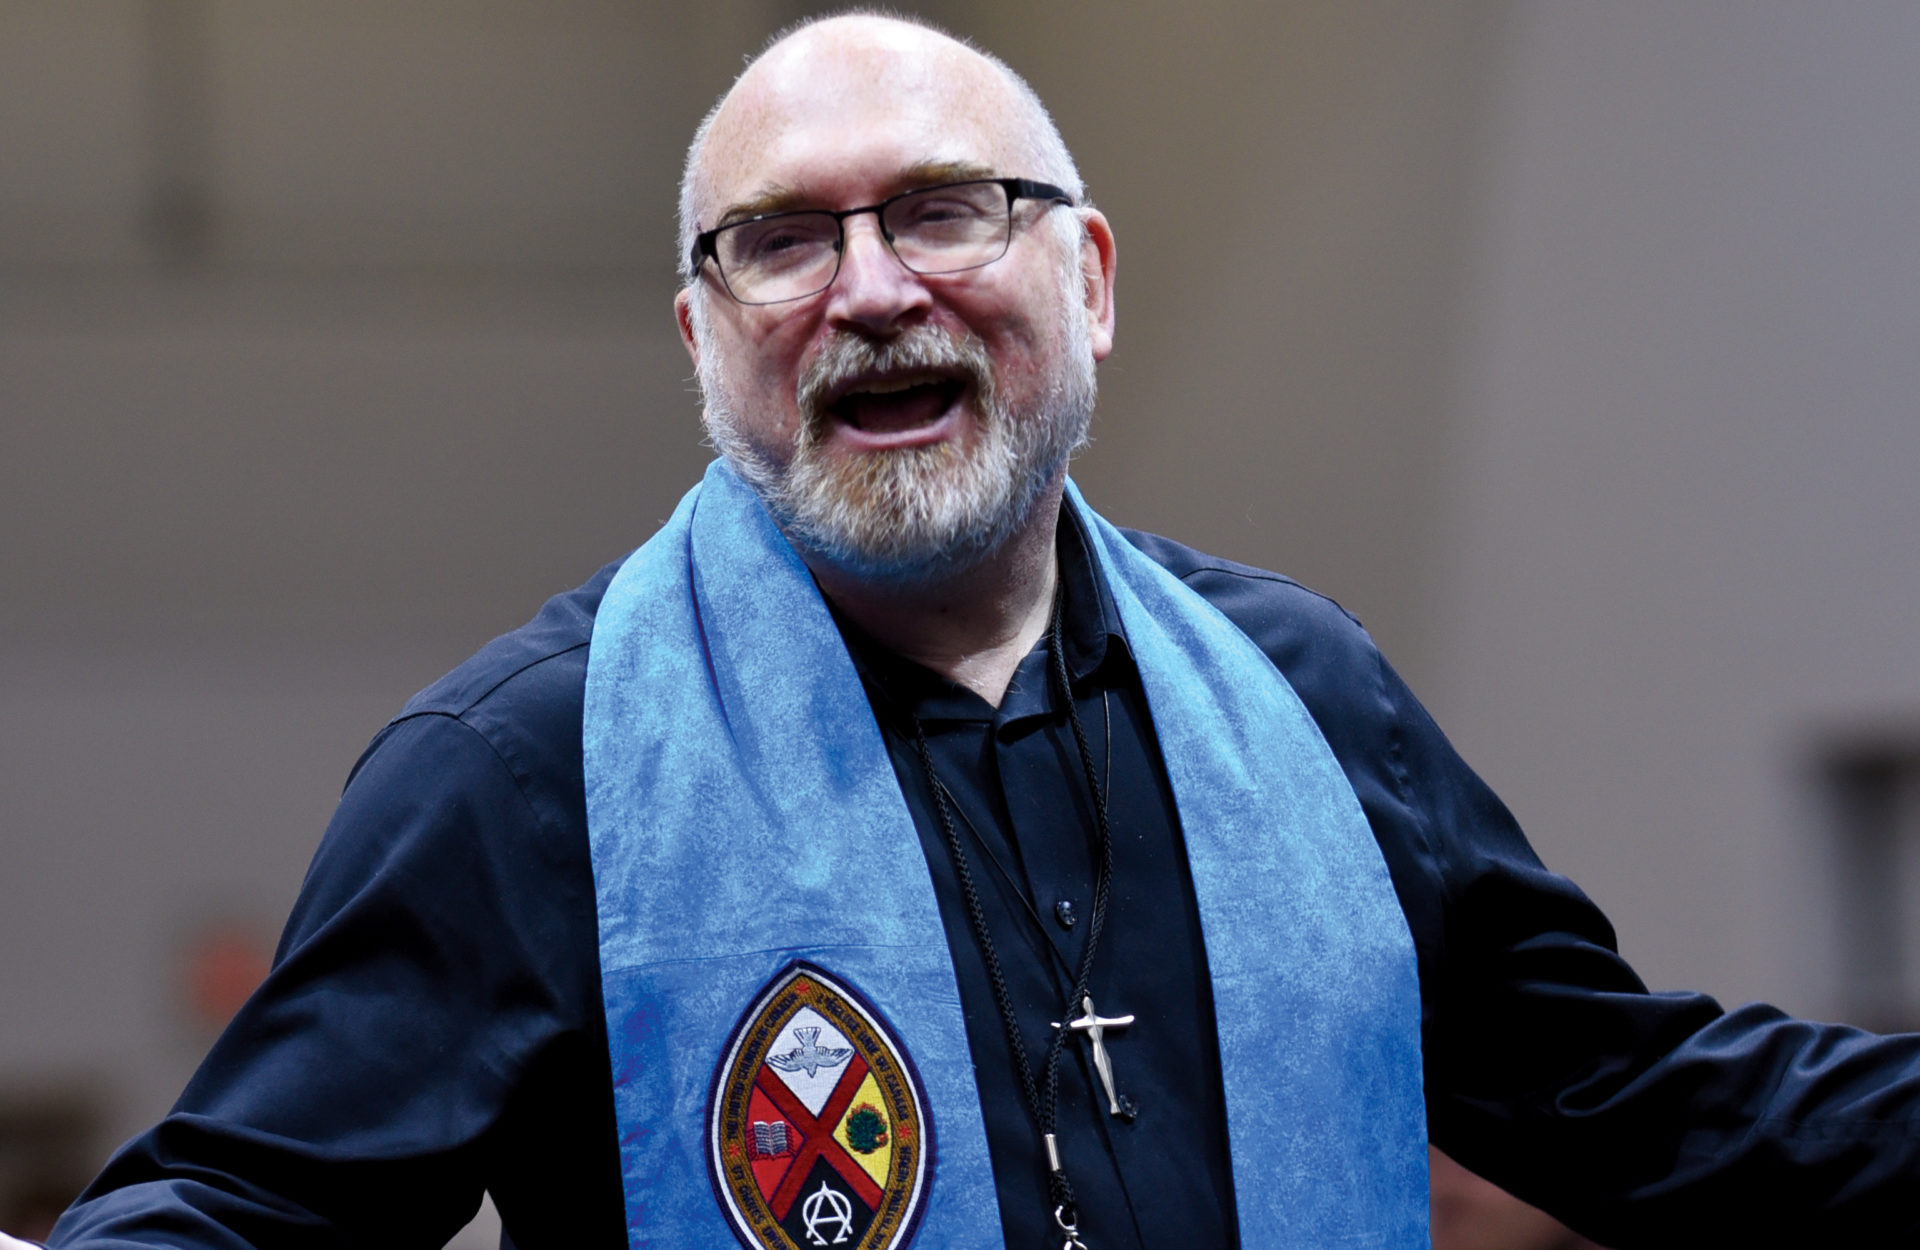 Rt. Rev. Richard Bott was elected as new moderator of the United Church of Canada in July. (Credit: Richard C. Choe)